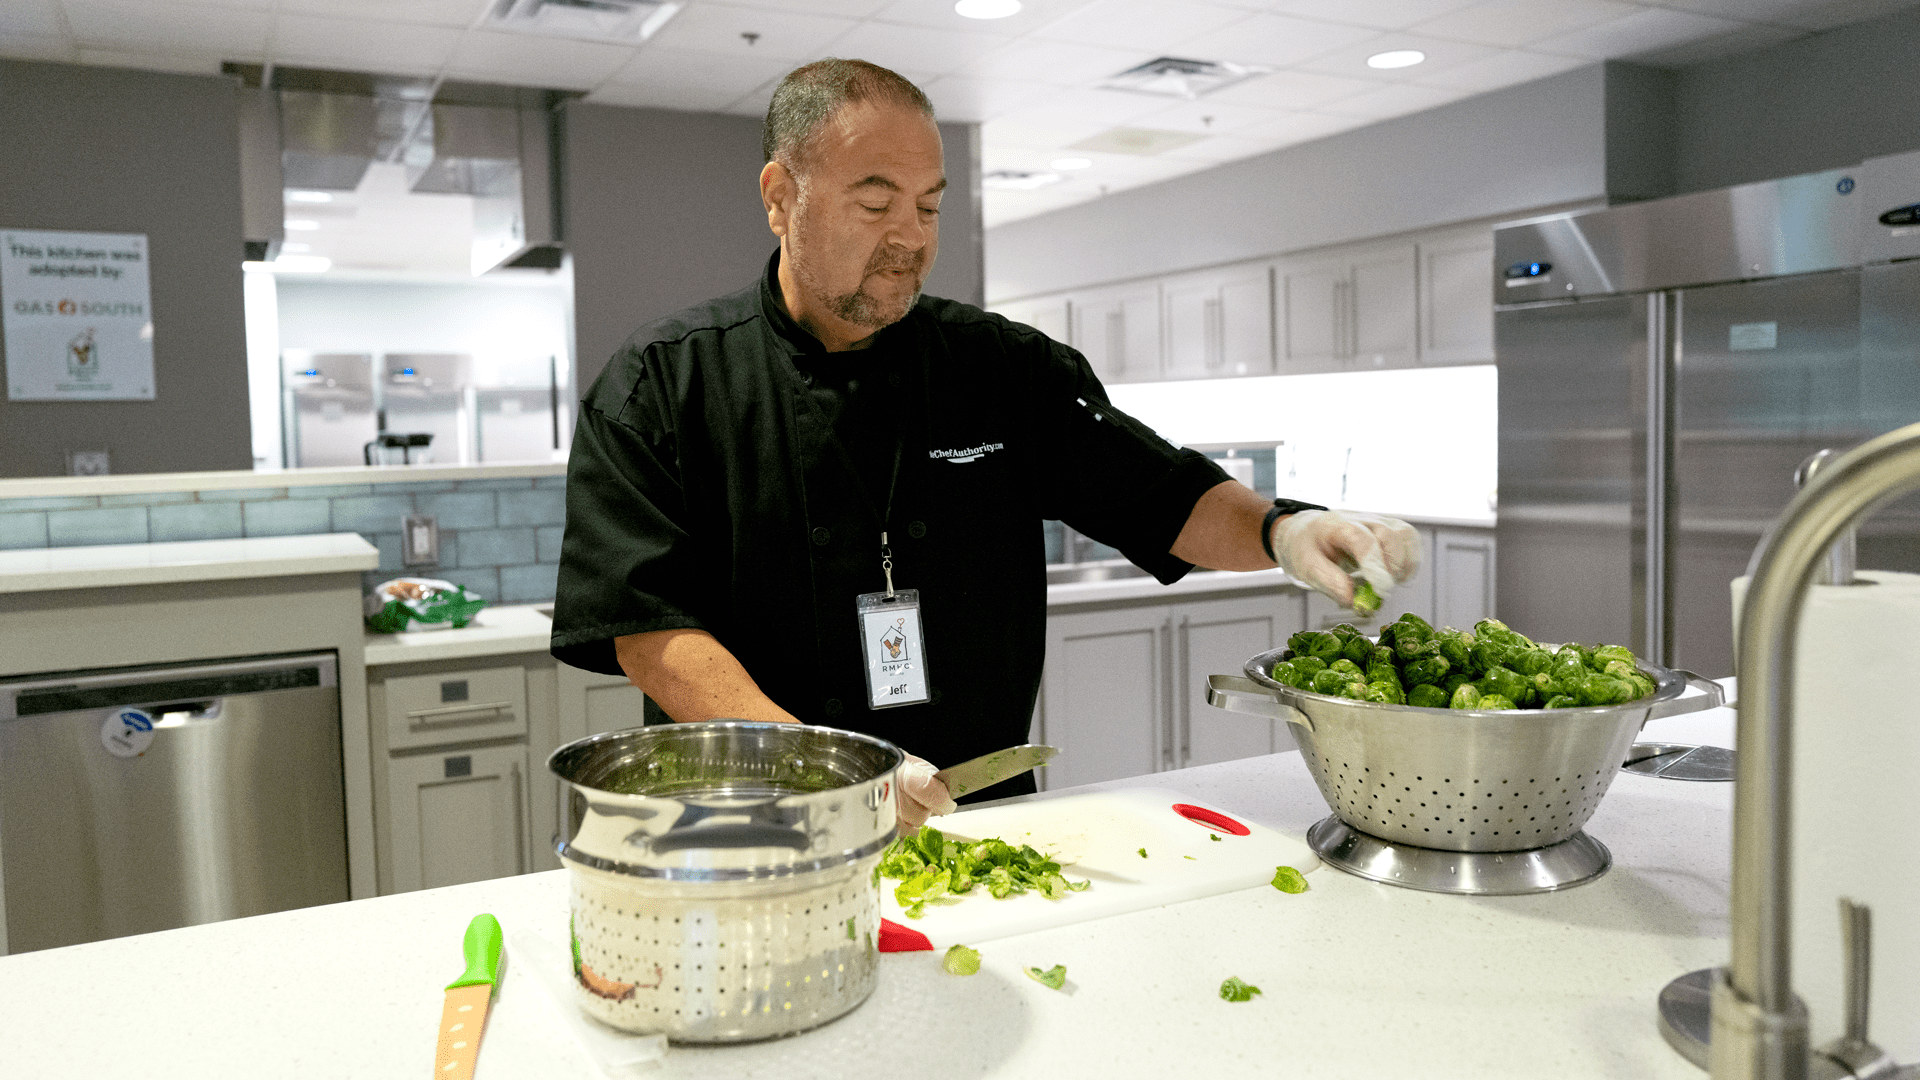 Meals That Heal with Chef Jeff